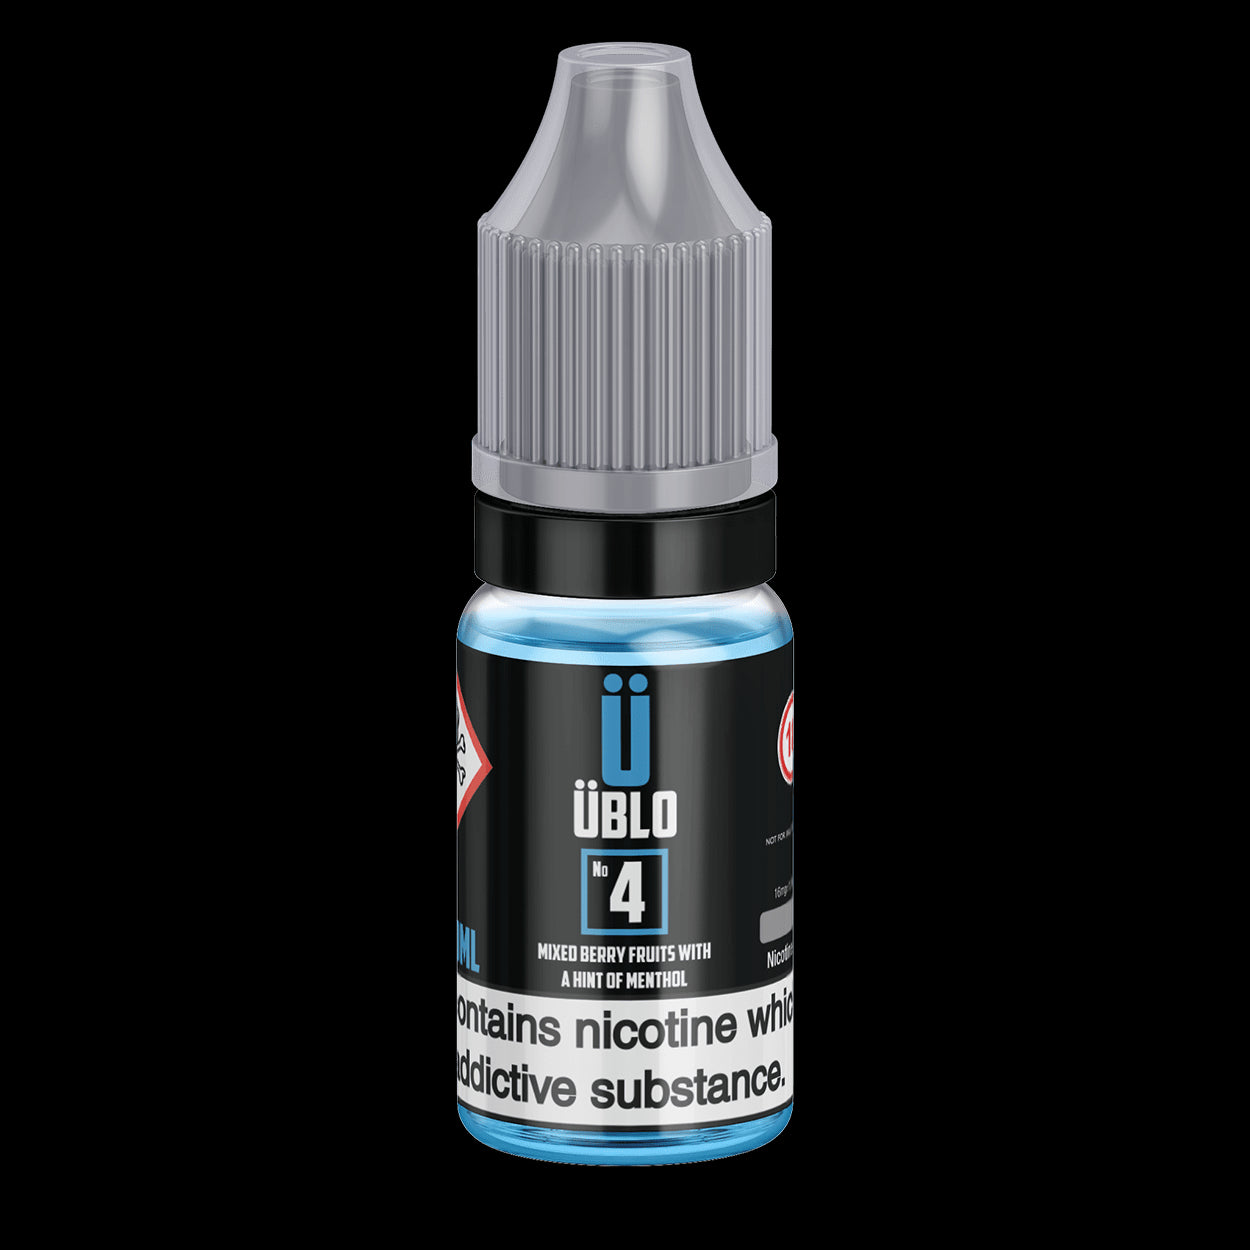 UBLO No4 10ml Mixed Berry Fruits With A Hint Of Menthol Eliquid